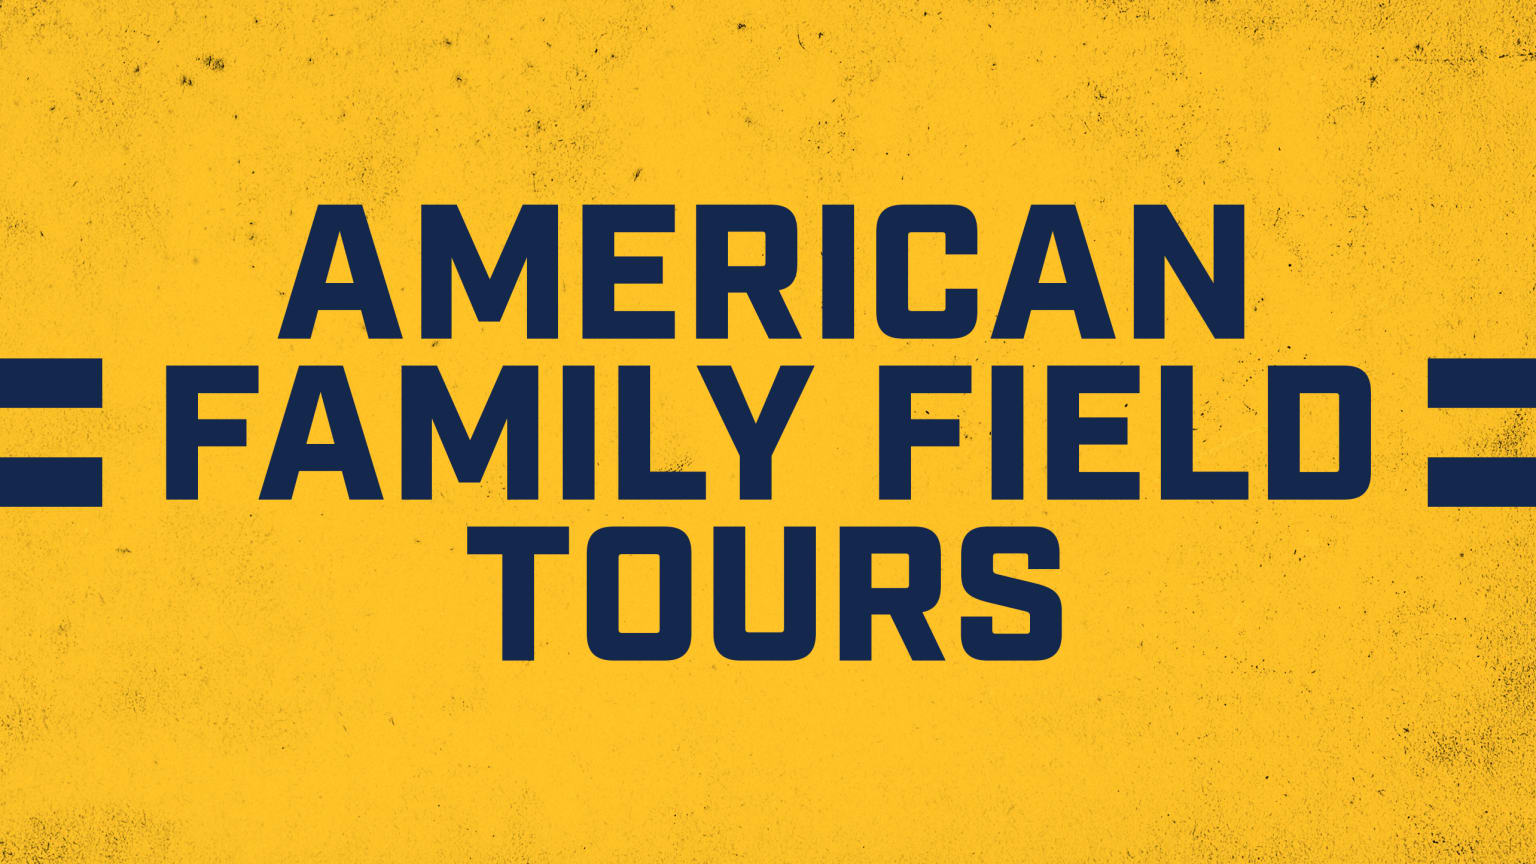 American Family Fields  Game Info, Things to Do & Places to Stay